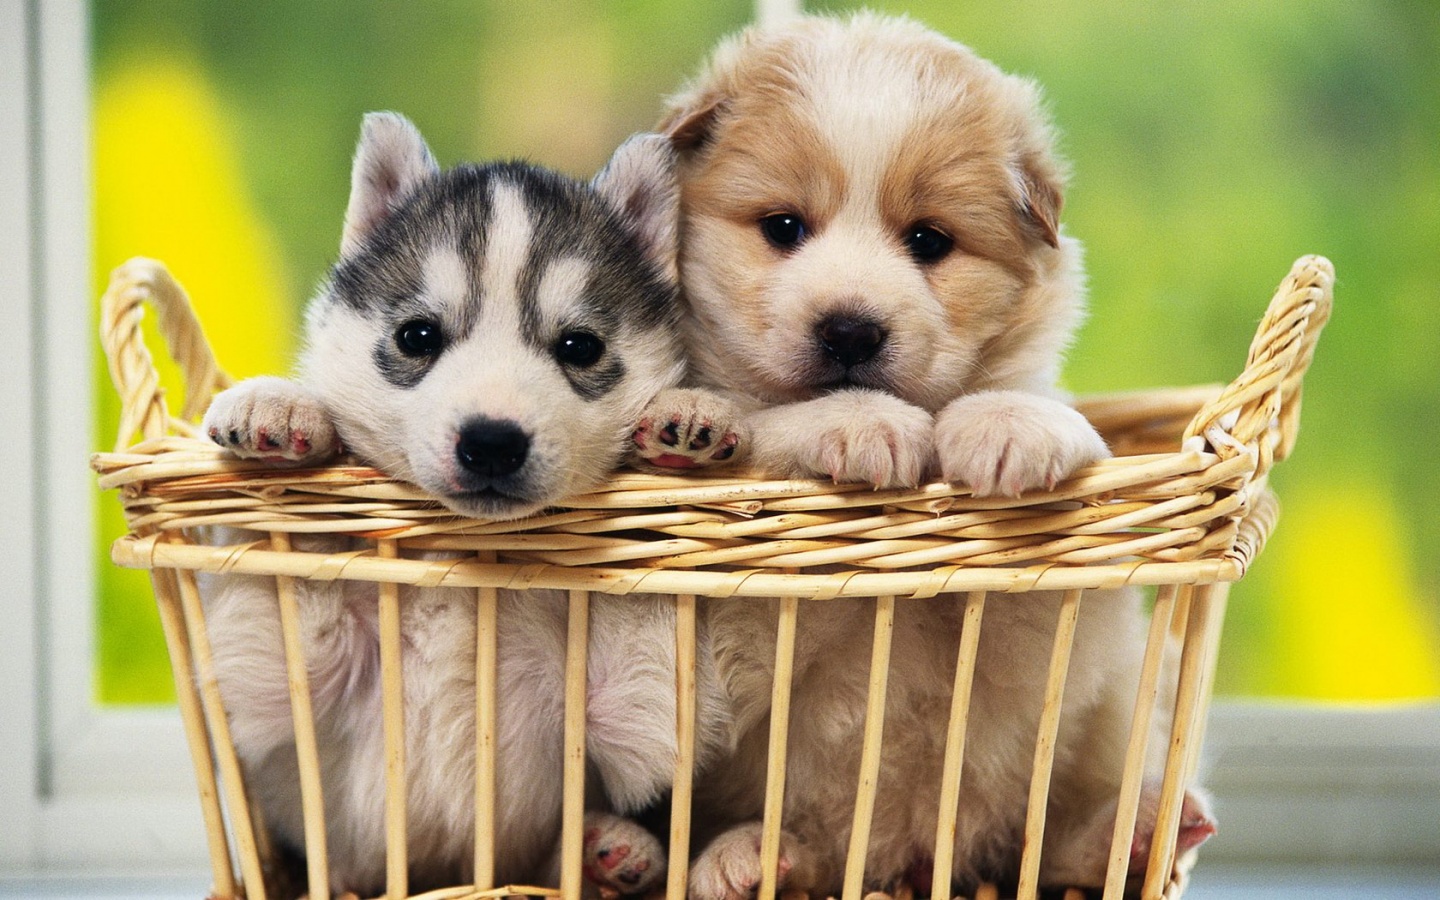  Cute Dogs Wallpapers Free Download Cute Dogs Wallpapers for Desktop